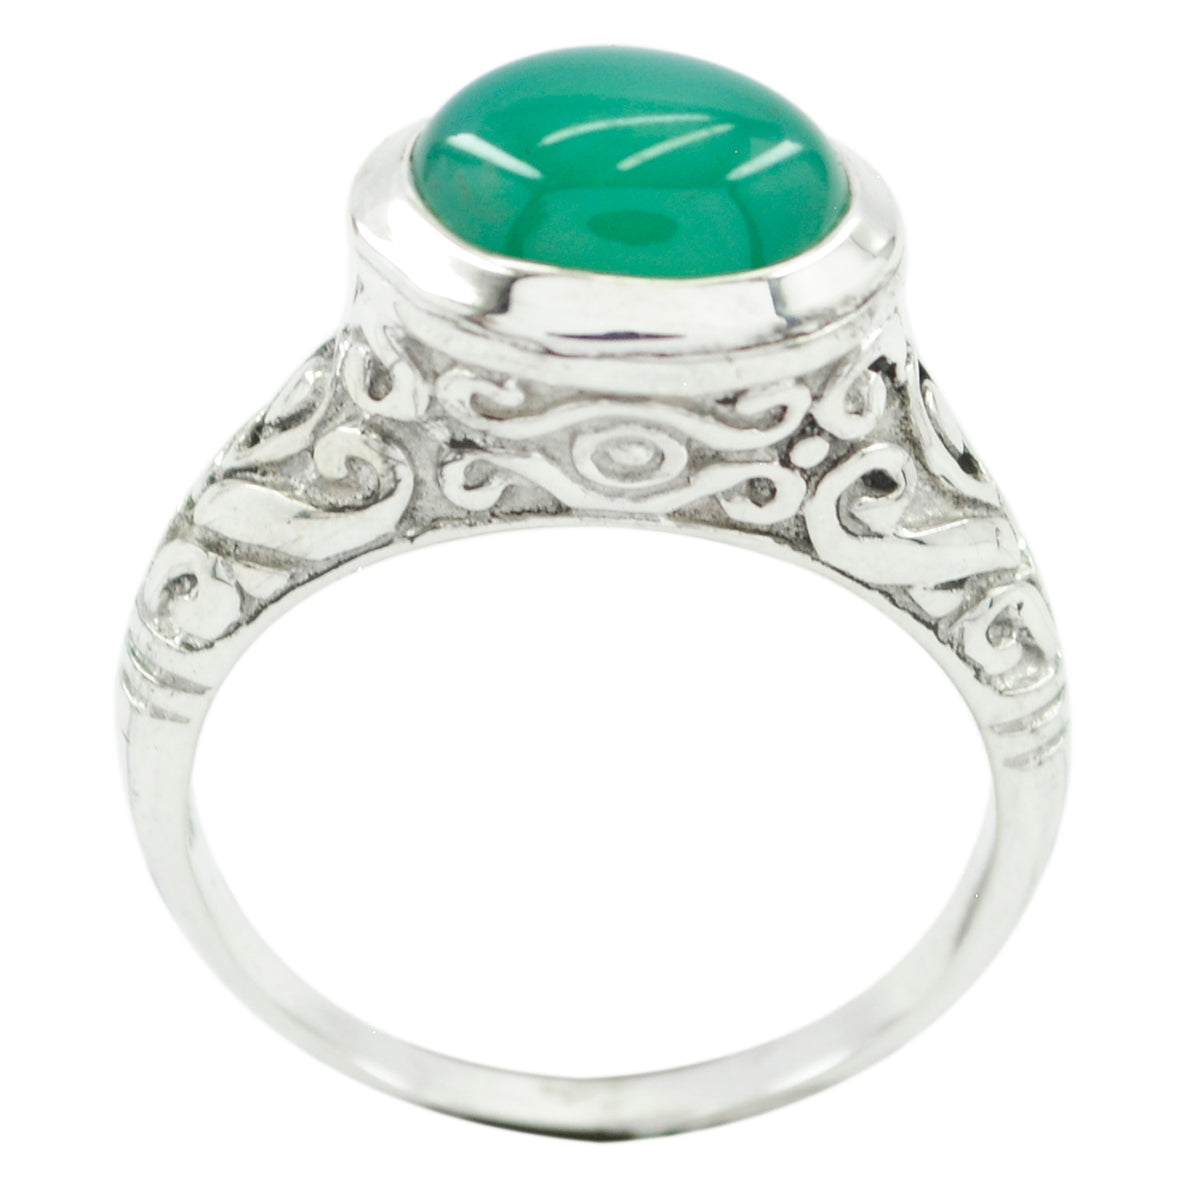 Nice Gem Green Onyx 925 Sterling Silver Ring Jewelry Box For Girlfriend